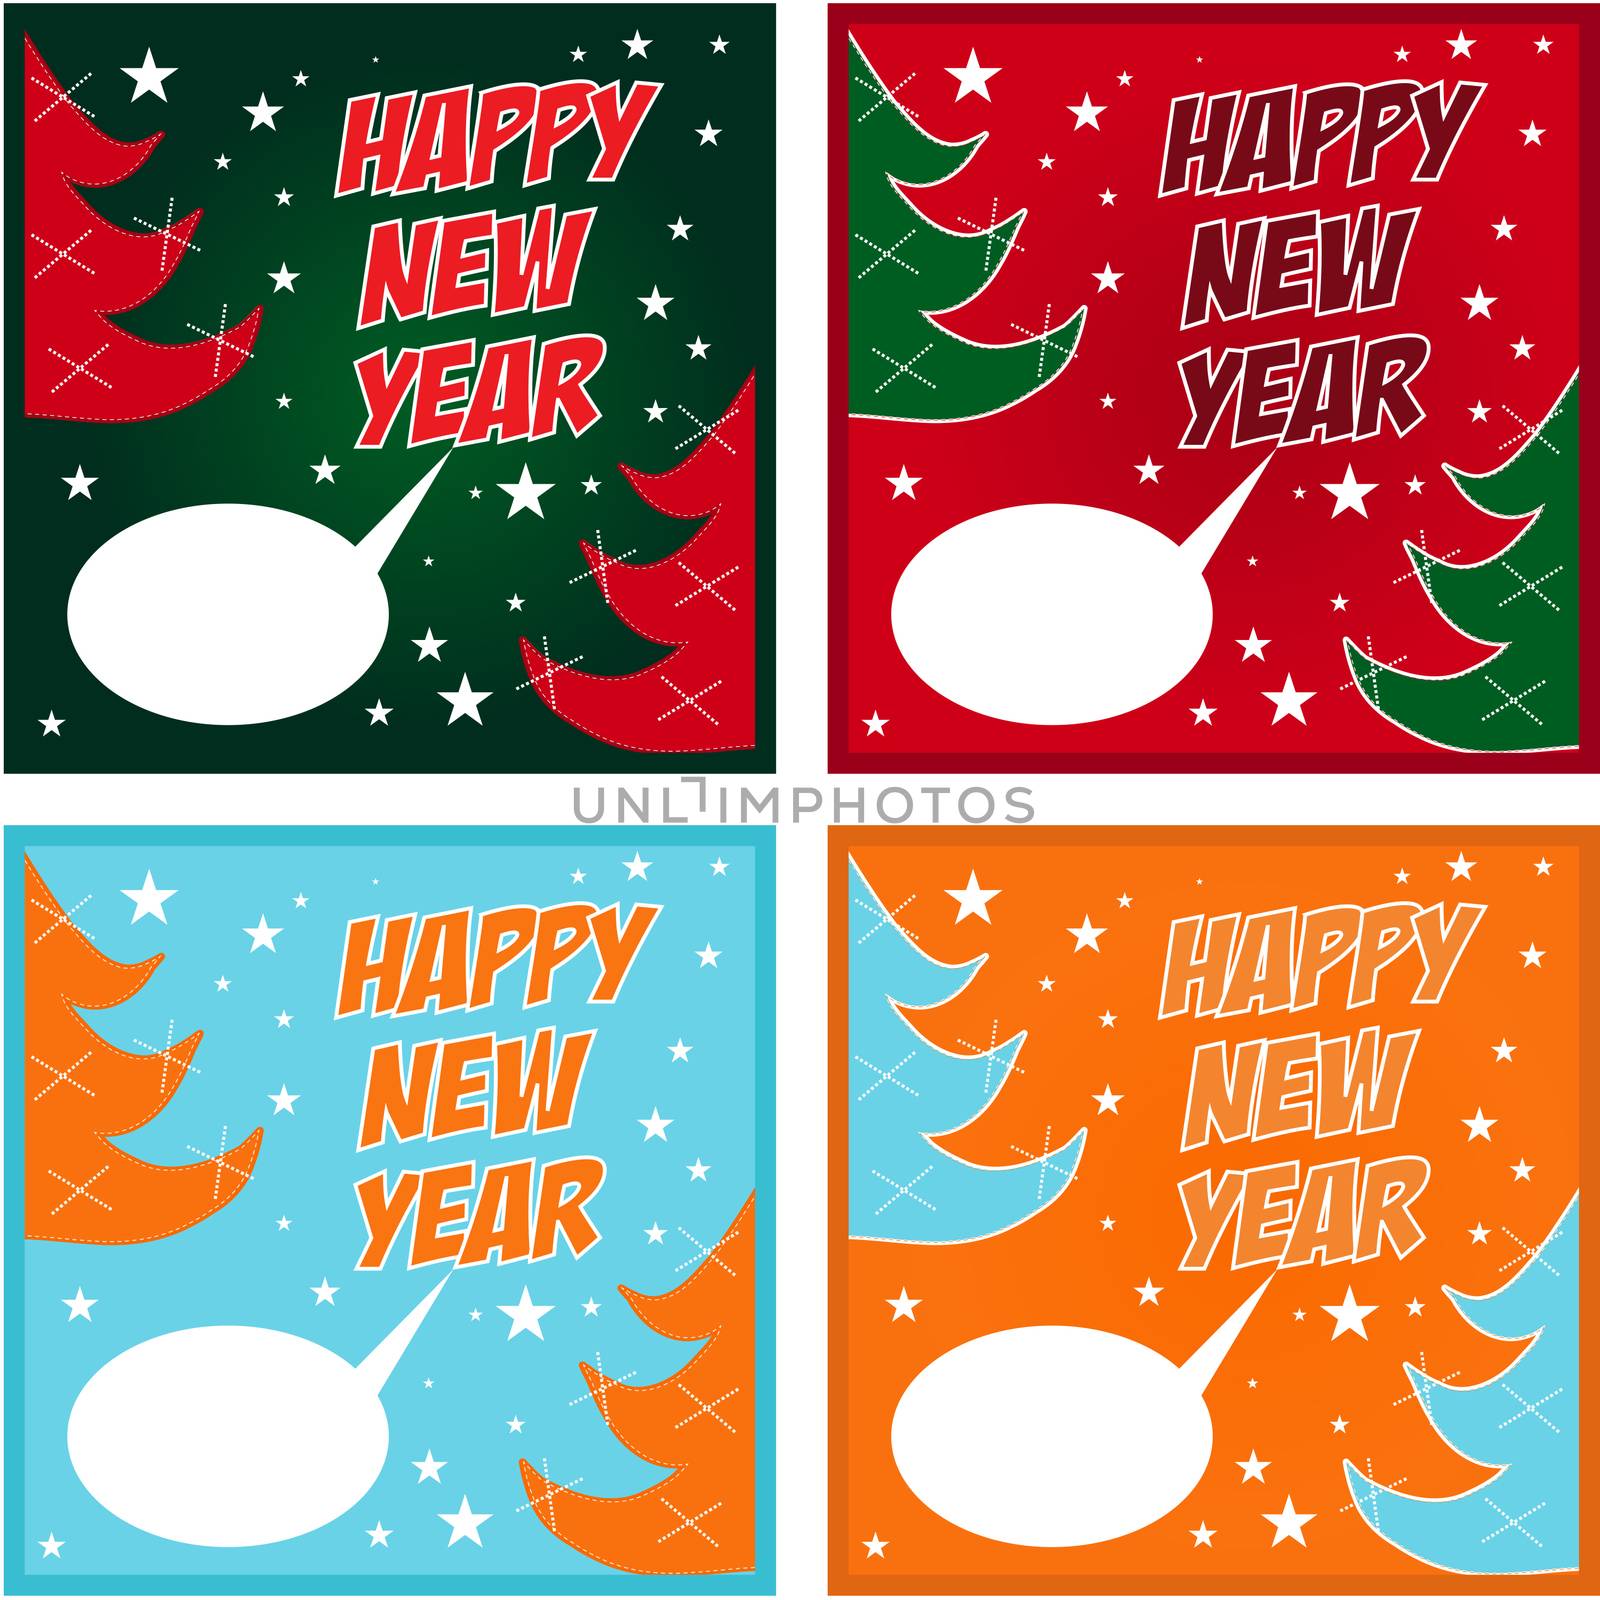 Happy New Year poster with text on chalkboard. Vector illustration